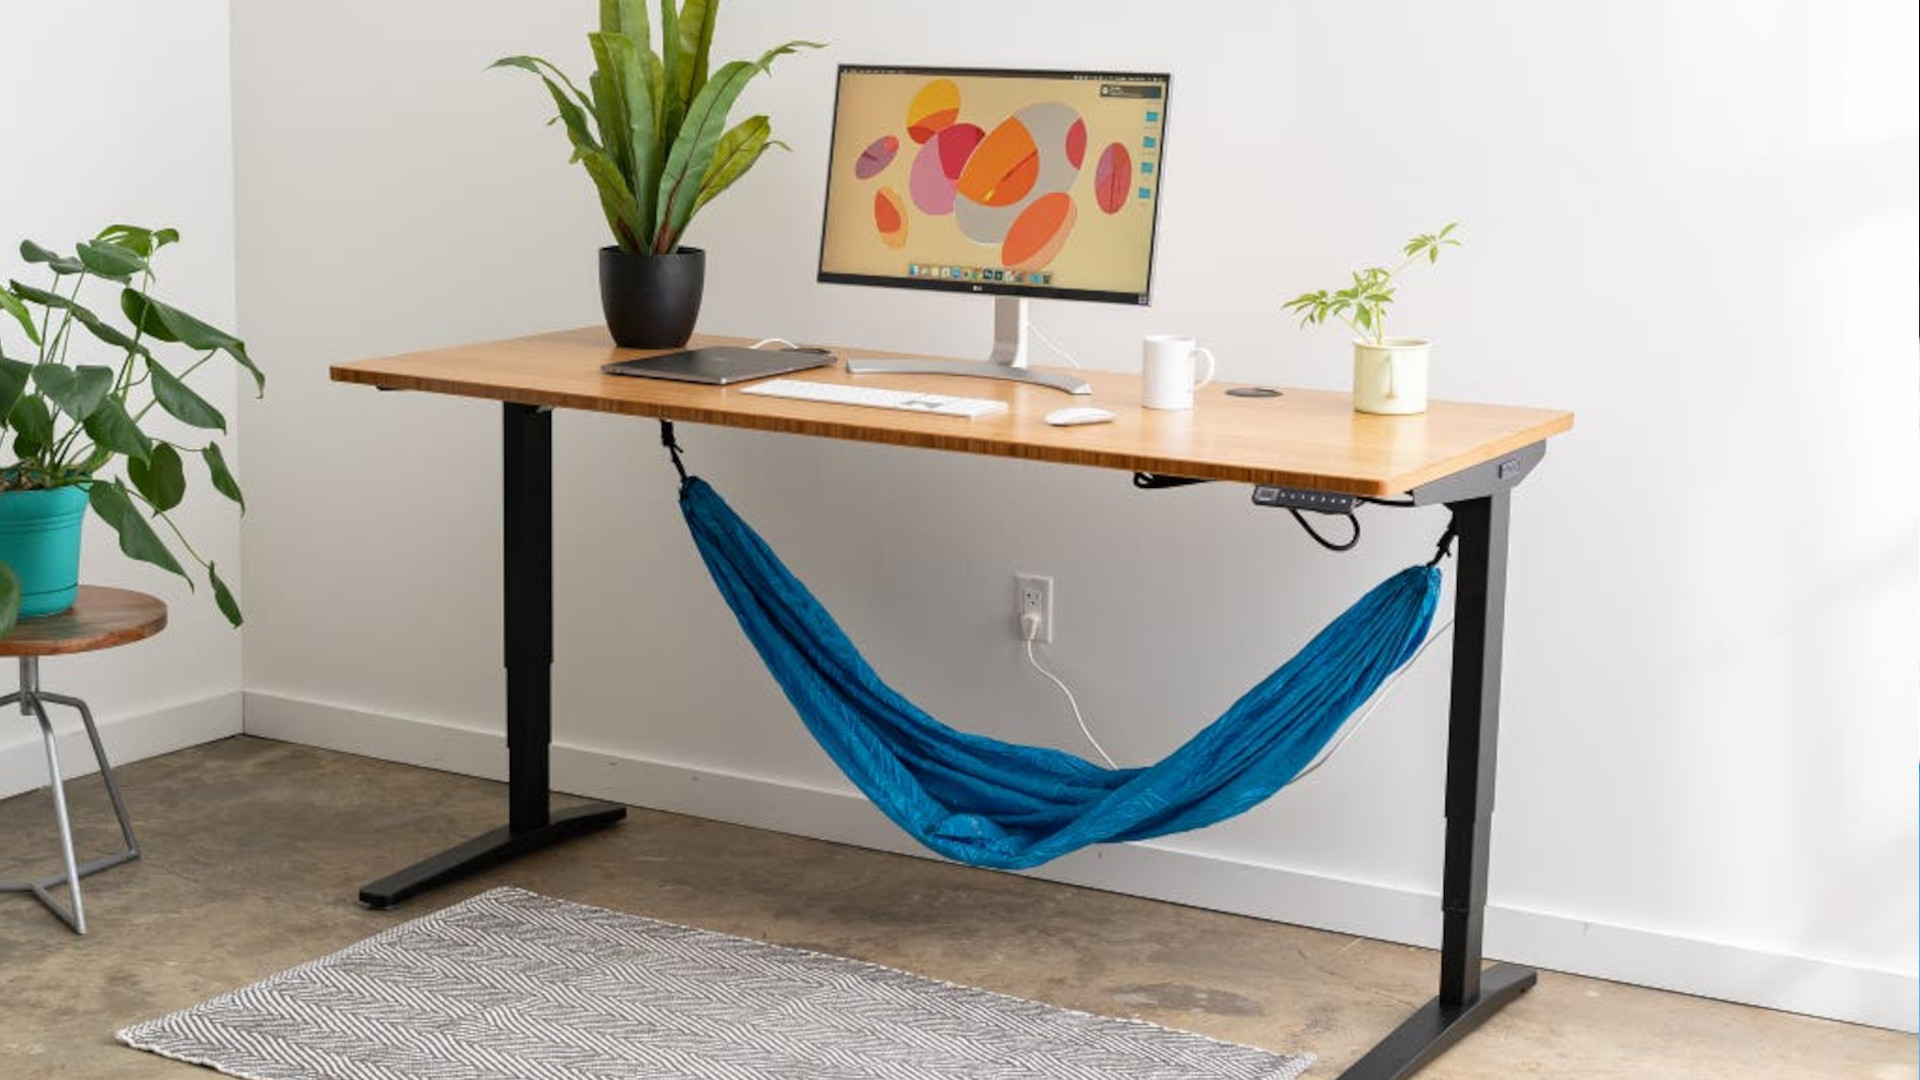 An Uplift V2 standing desk with a hammock set up underneath it